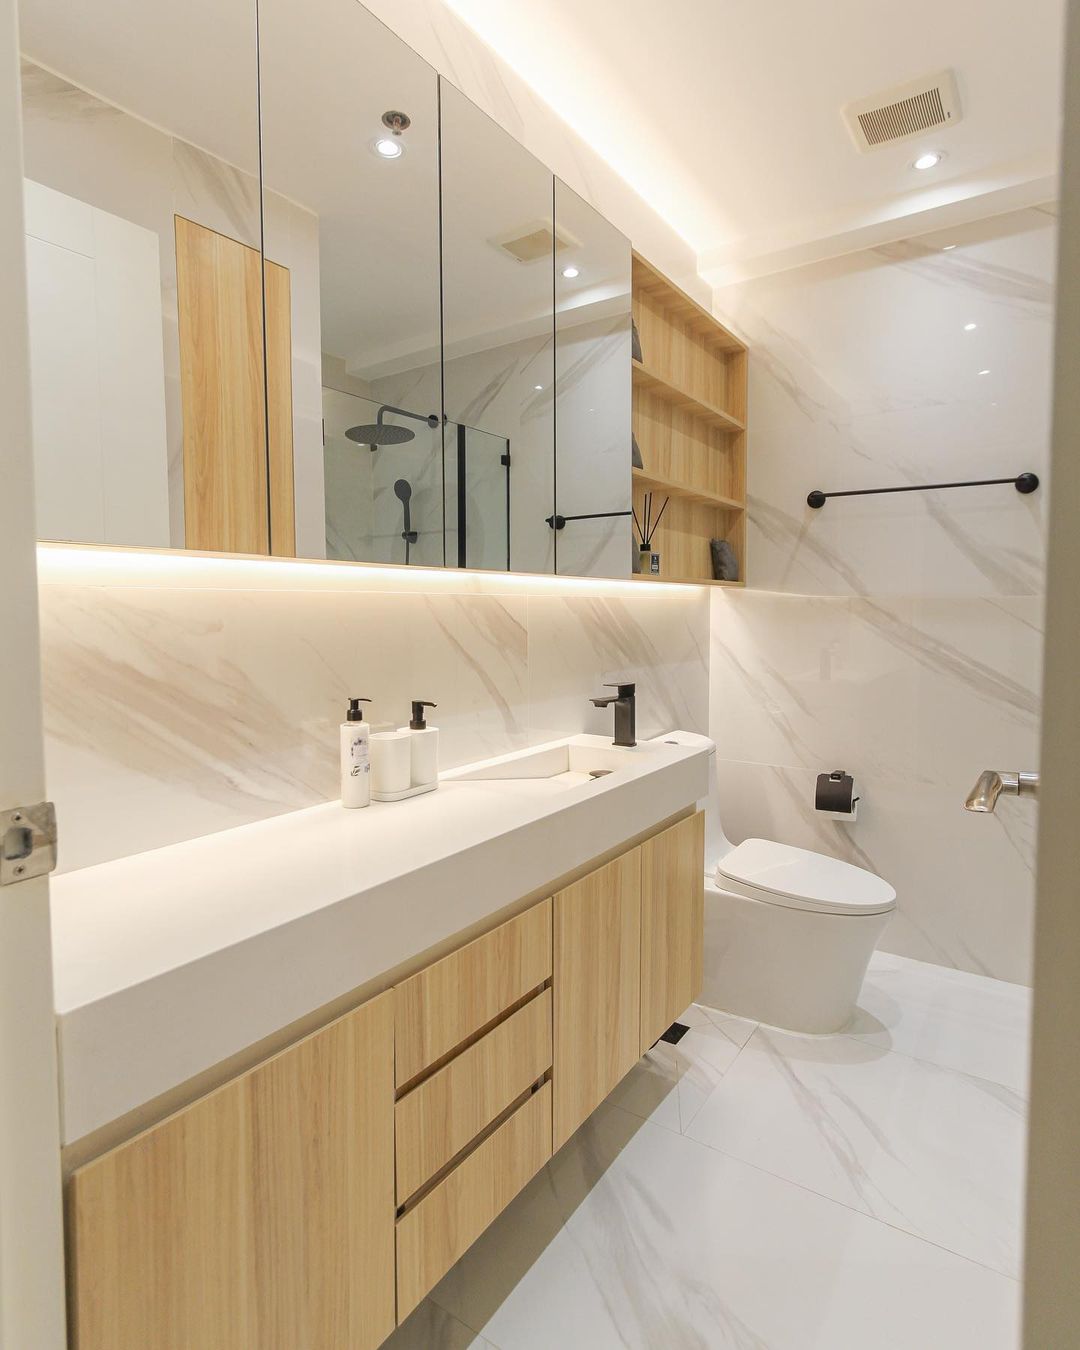 wooden cabinets in a bathroom